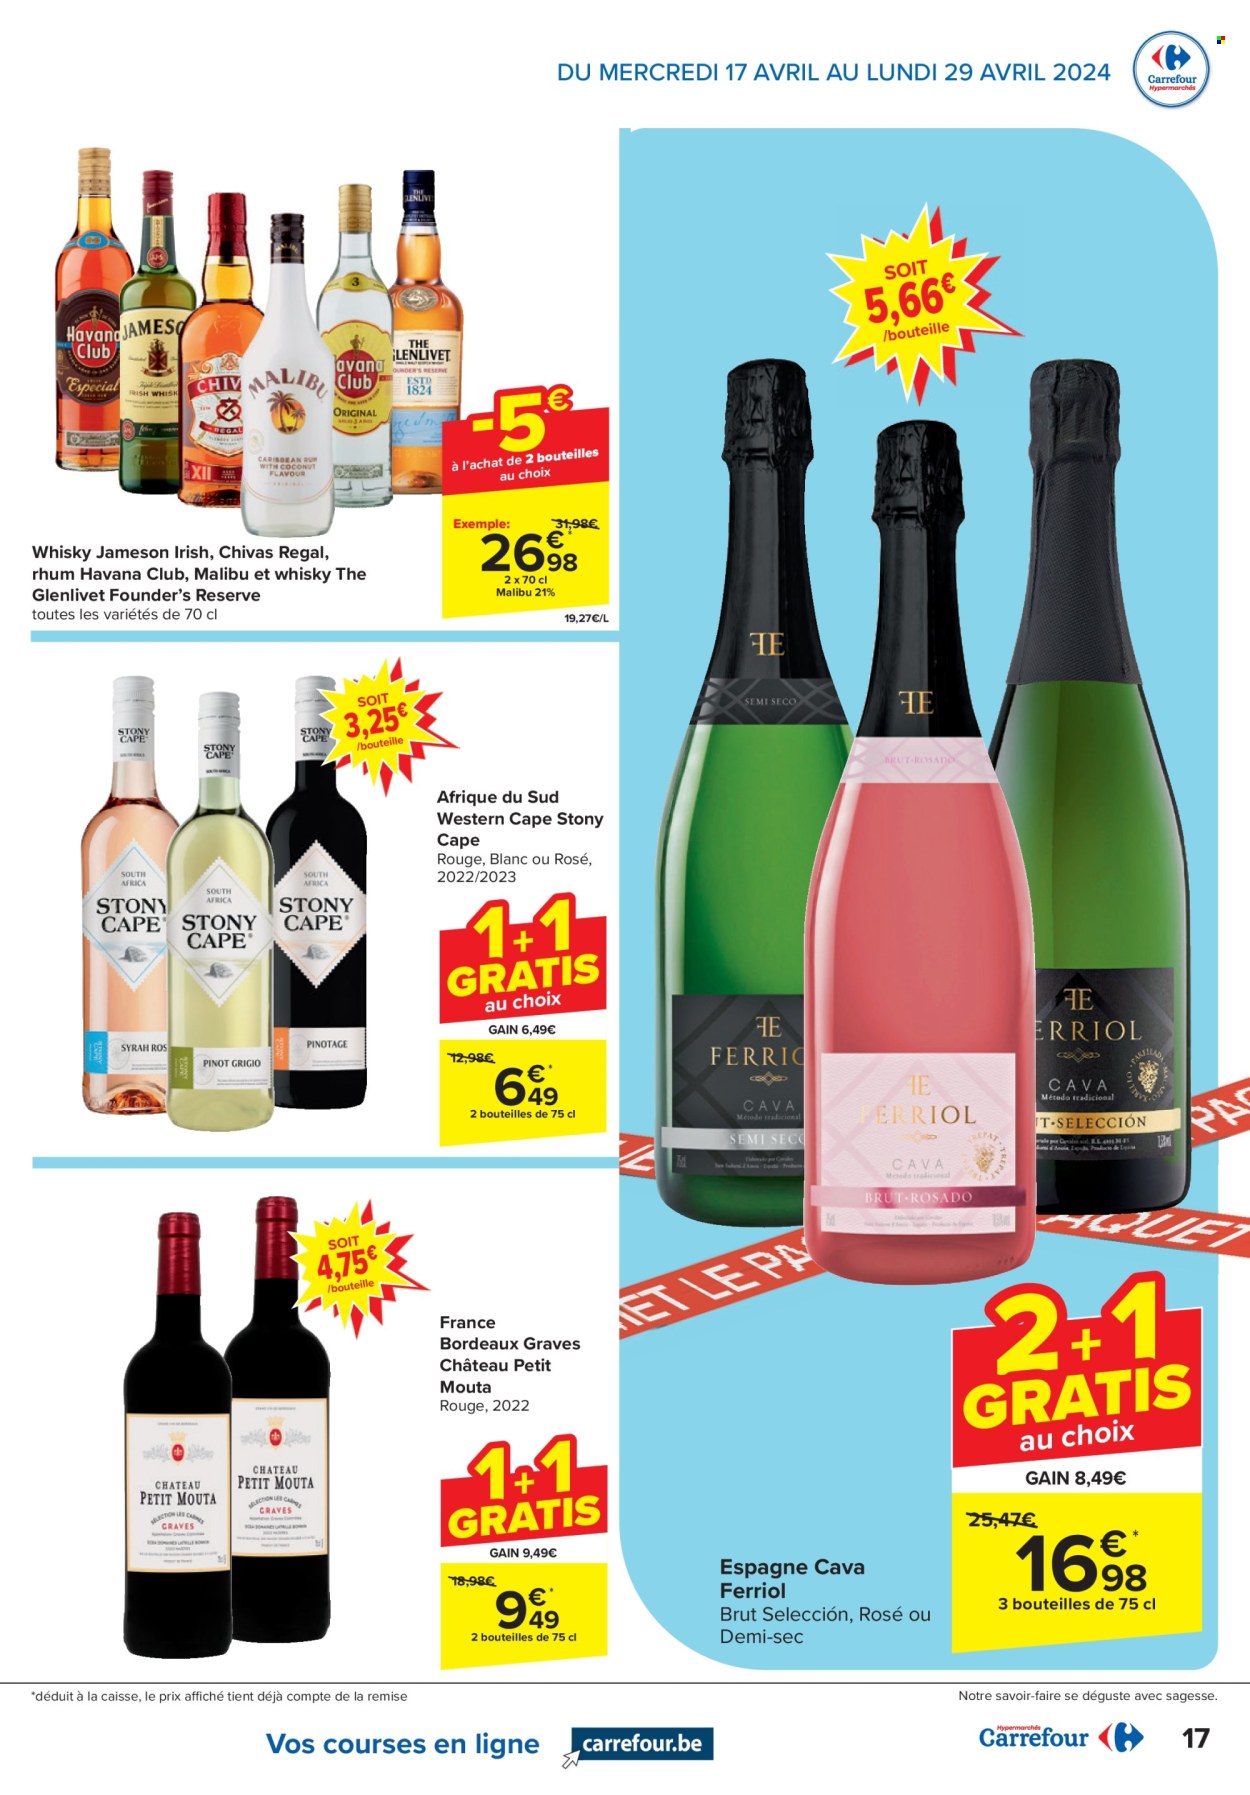 Catalogue Carrefour hypermarkt - 17.4.2024 - 29.4.2024. Page 17.